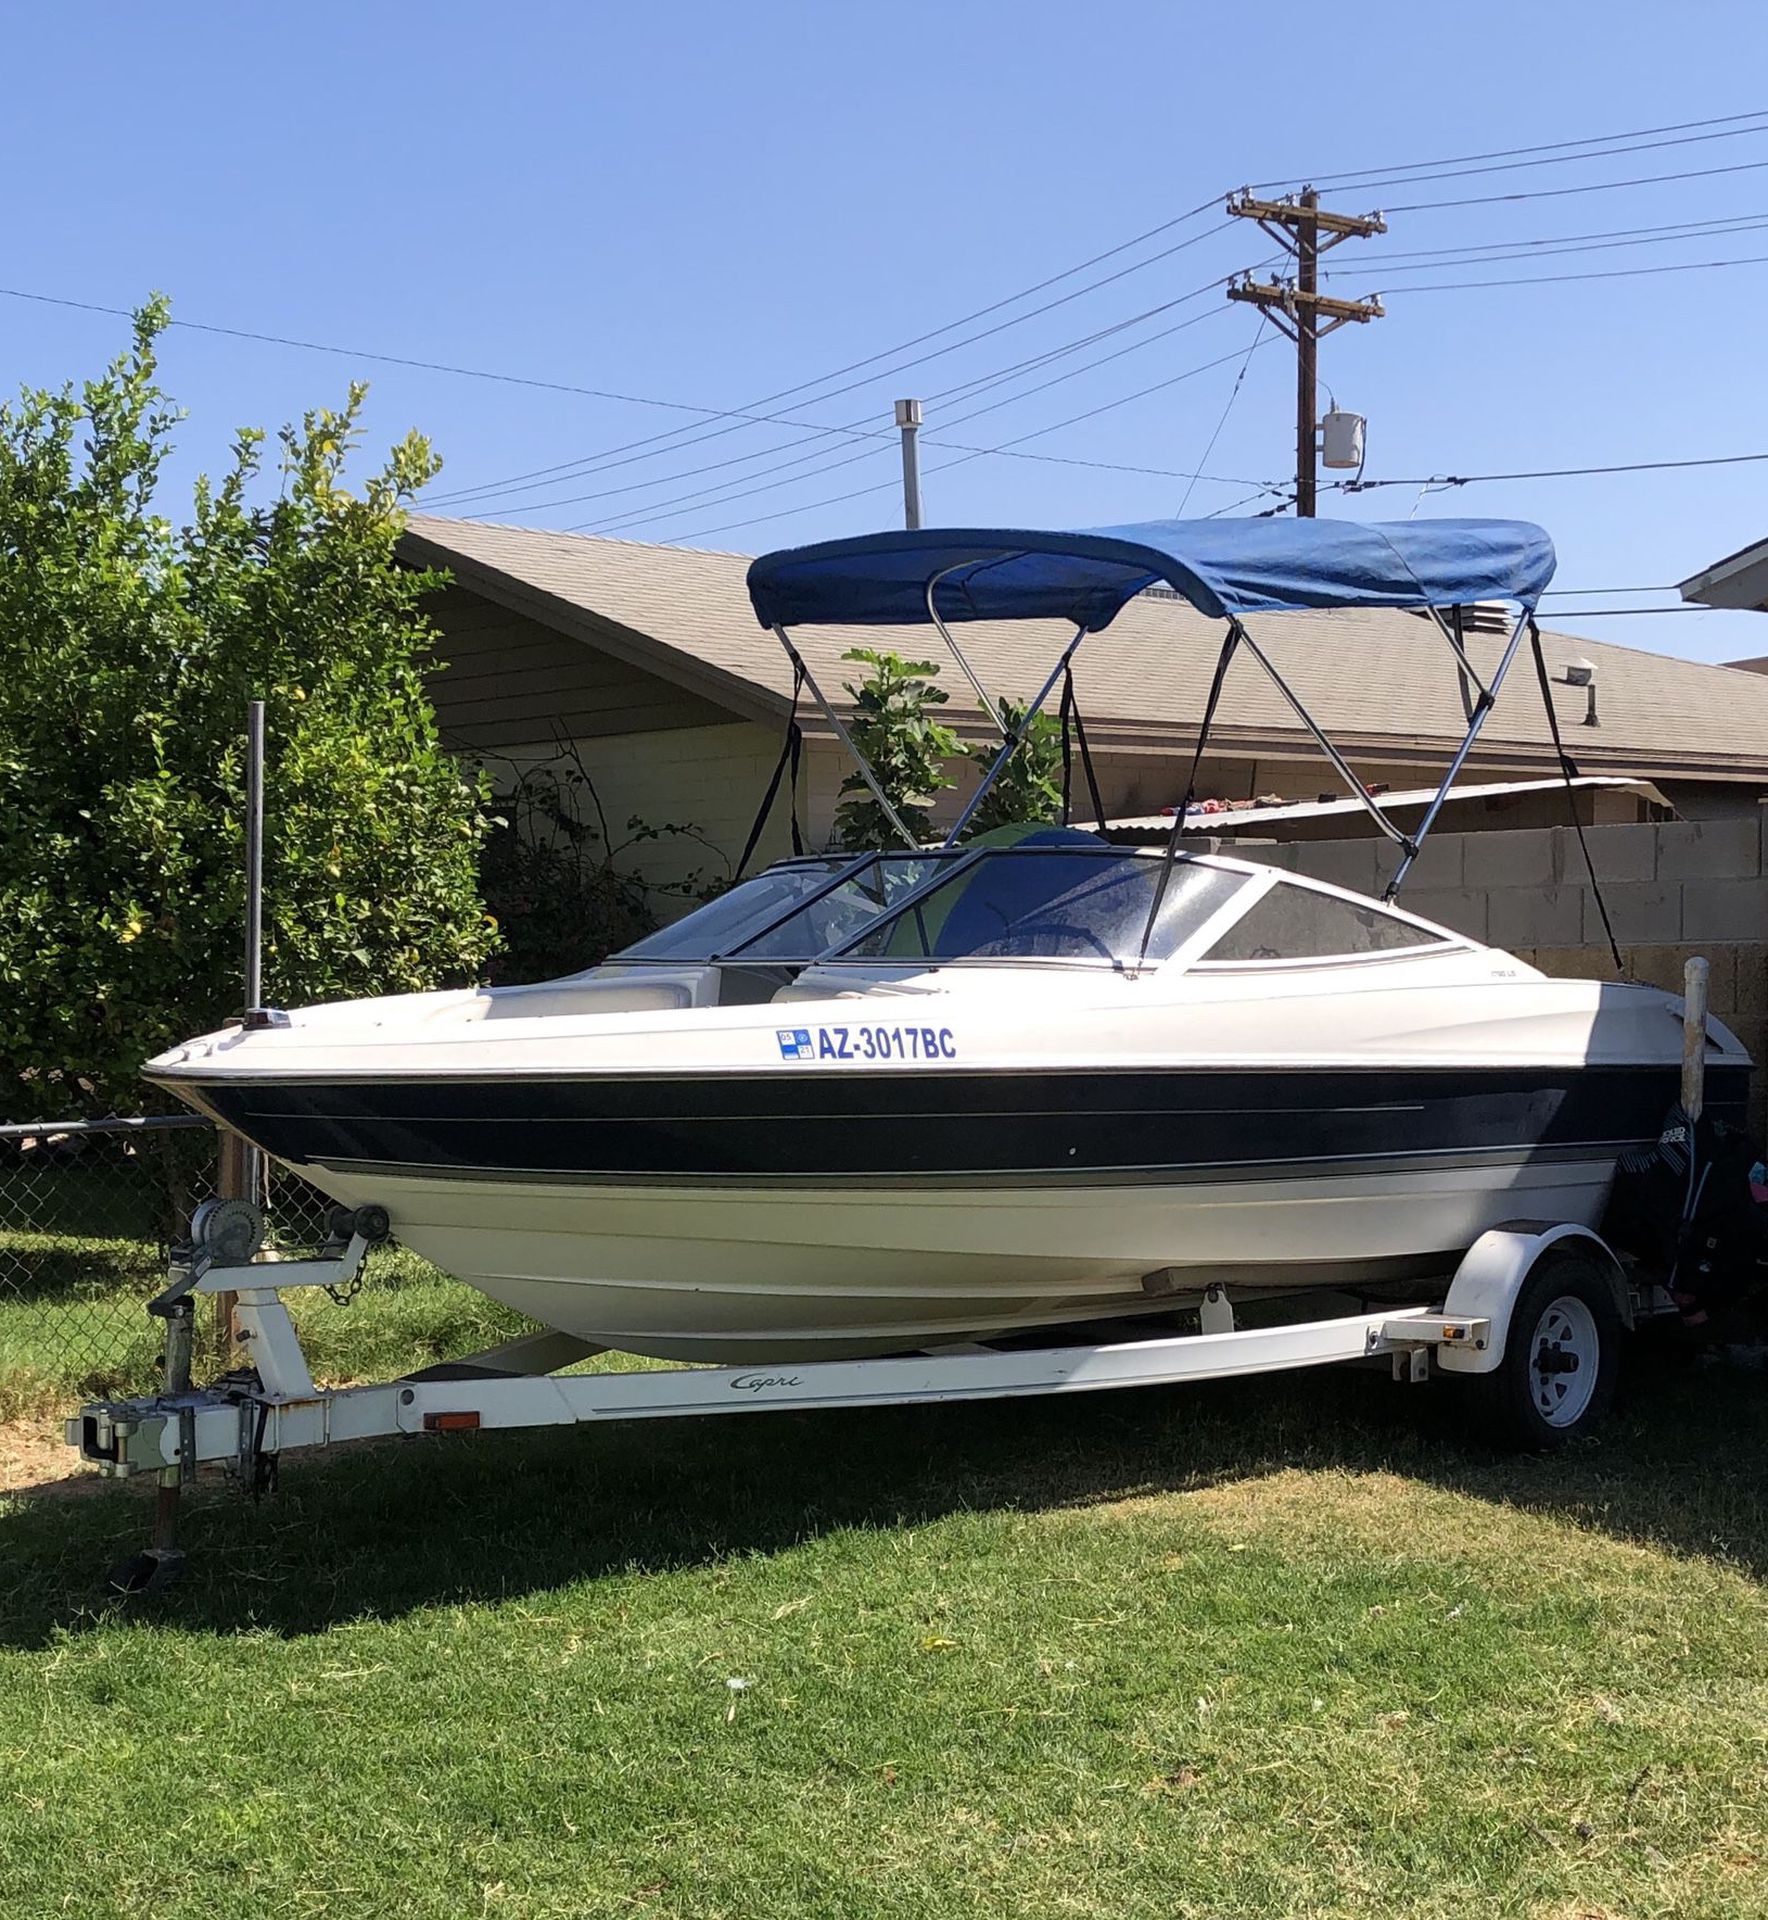 Ready for the lake it’s 1997 Bayliner it’s a four-cylinder it’s got lots of new parts I just change the wires the cables new battery new starter